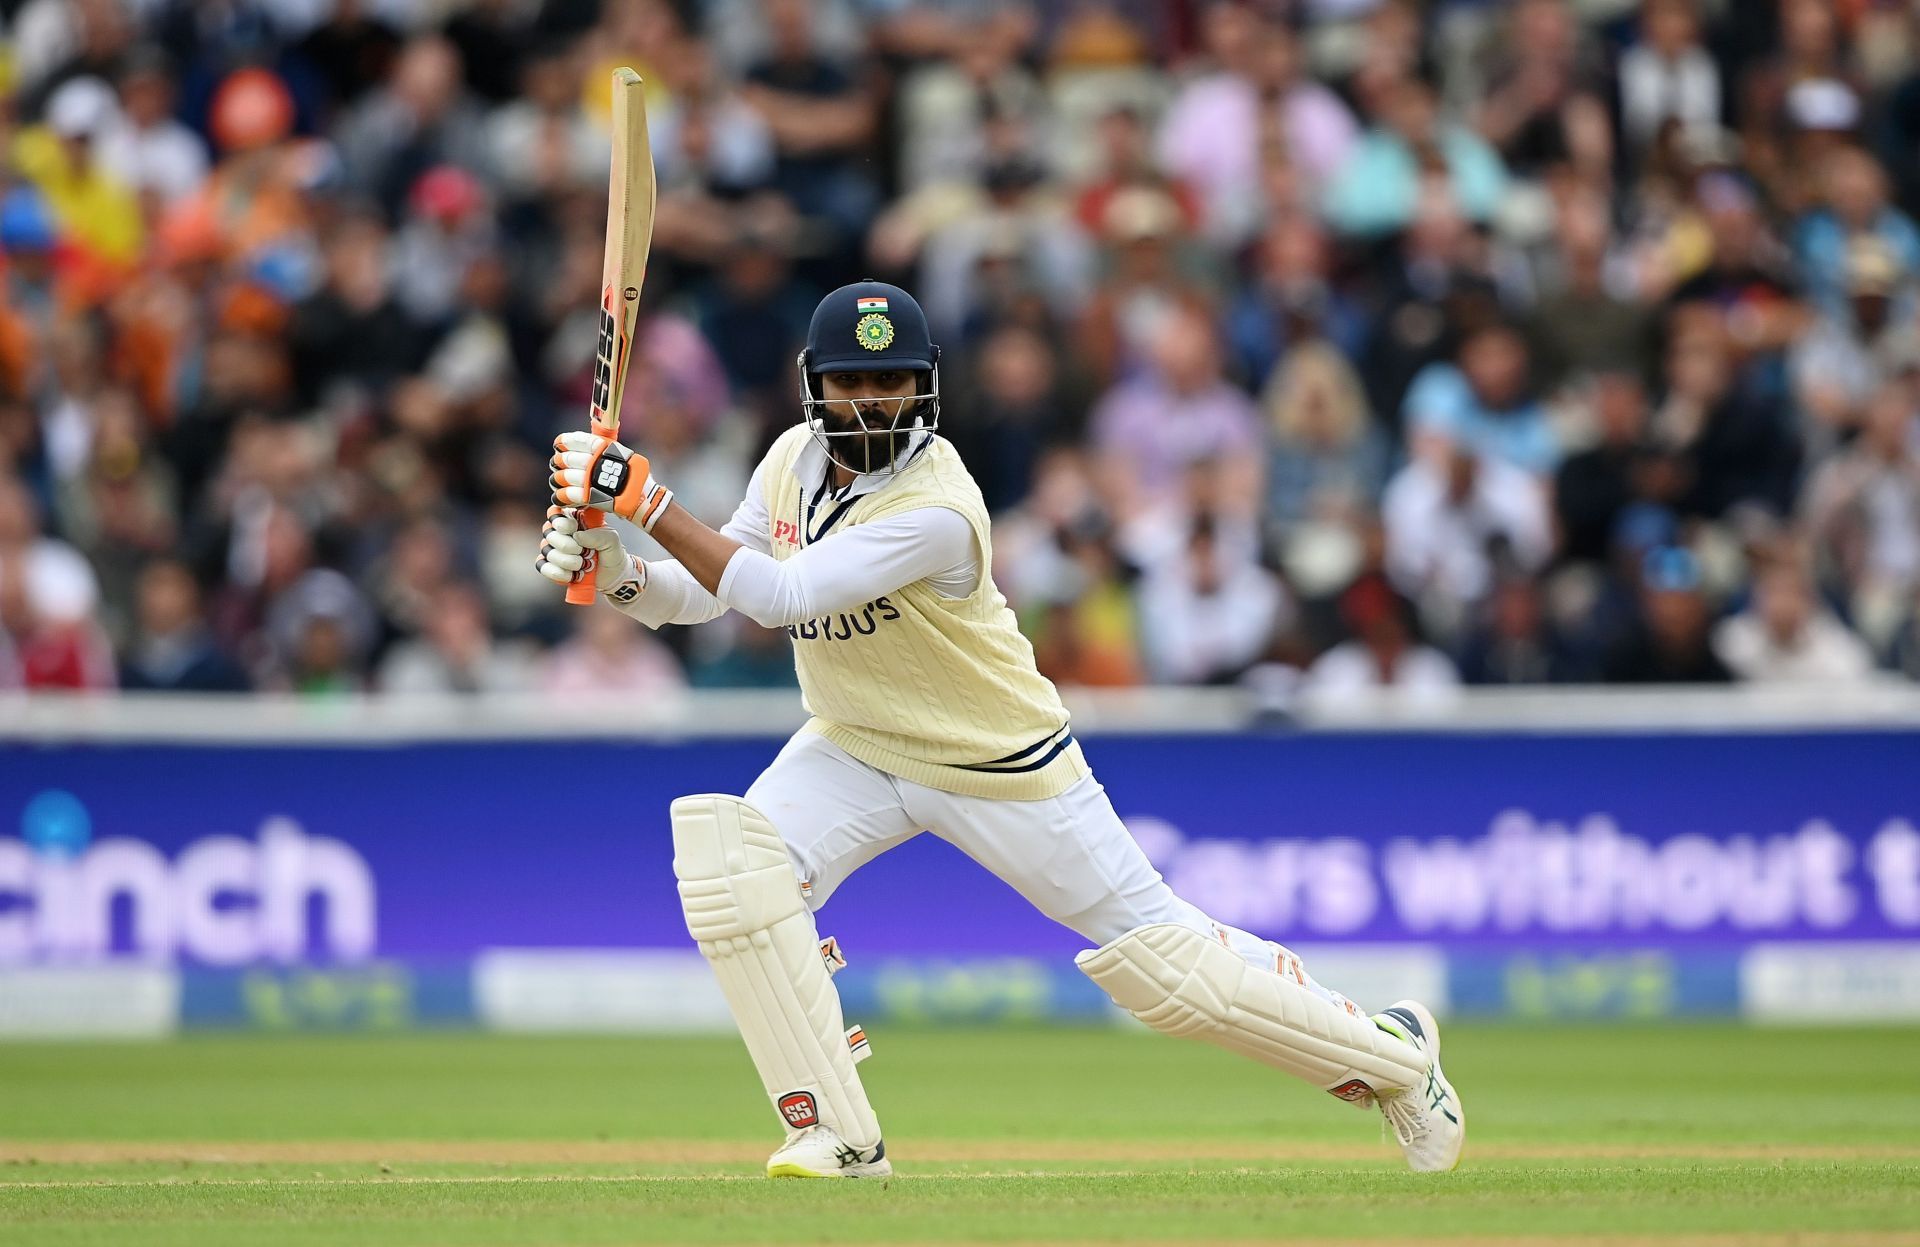 Ravindra Jadeja was largely untroubled throughout his innings